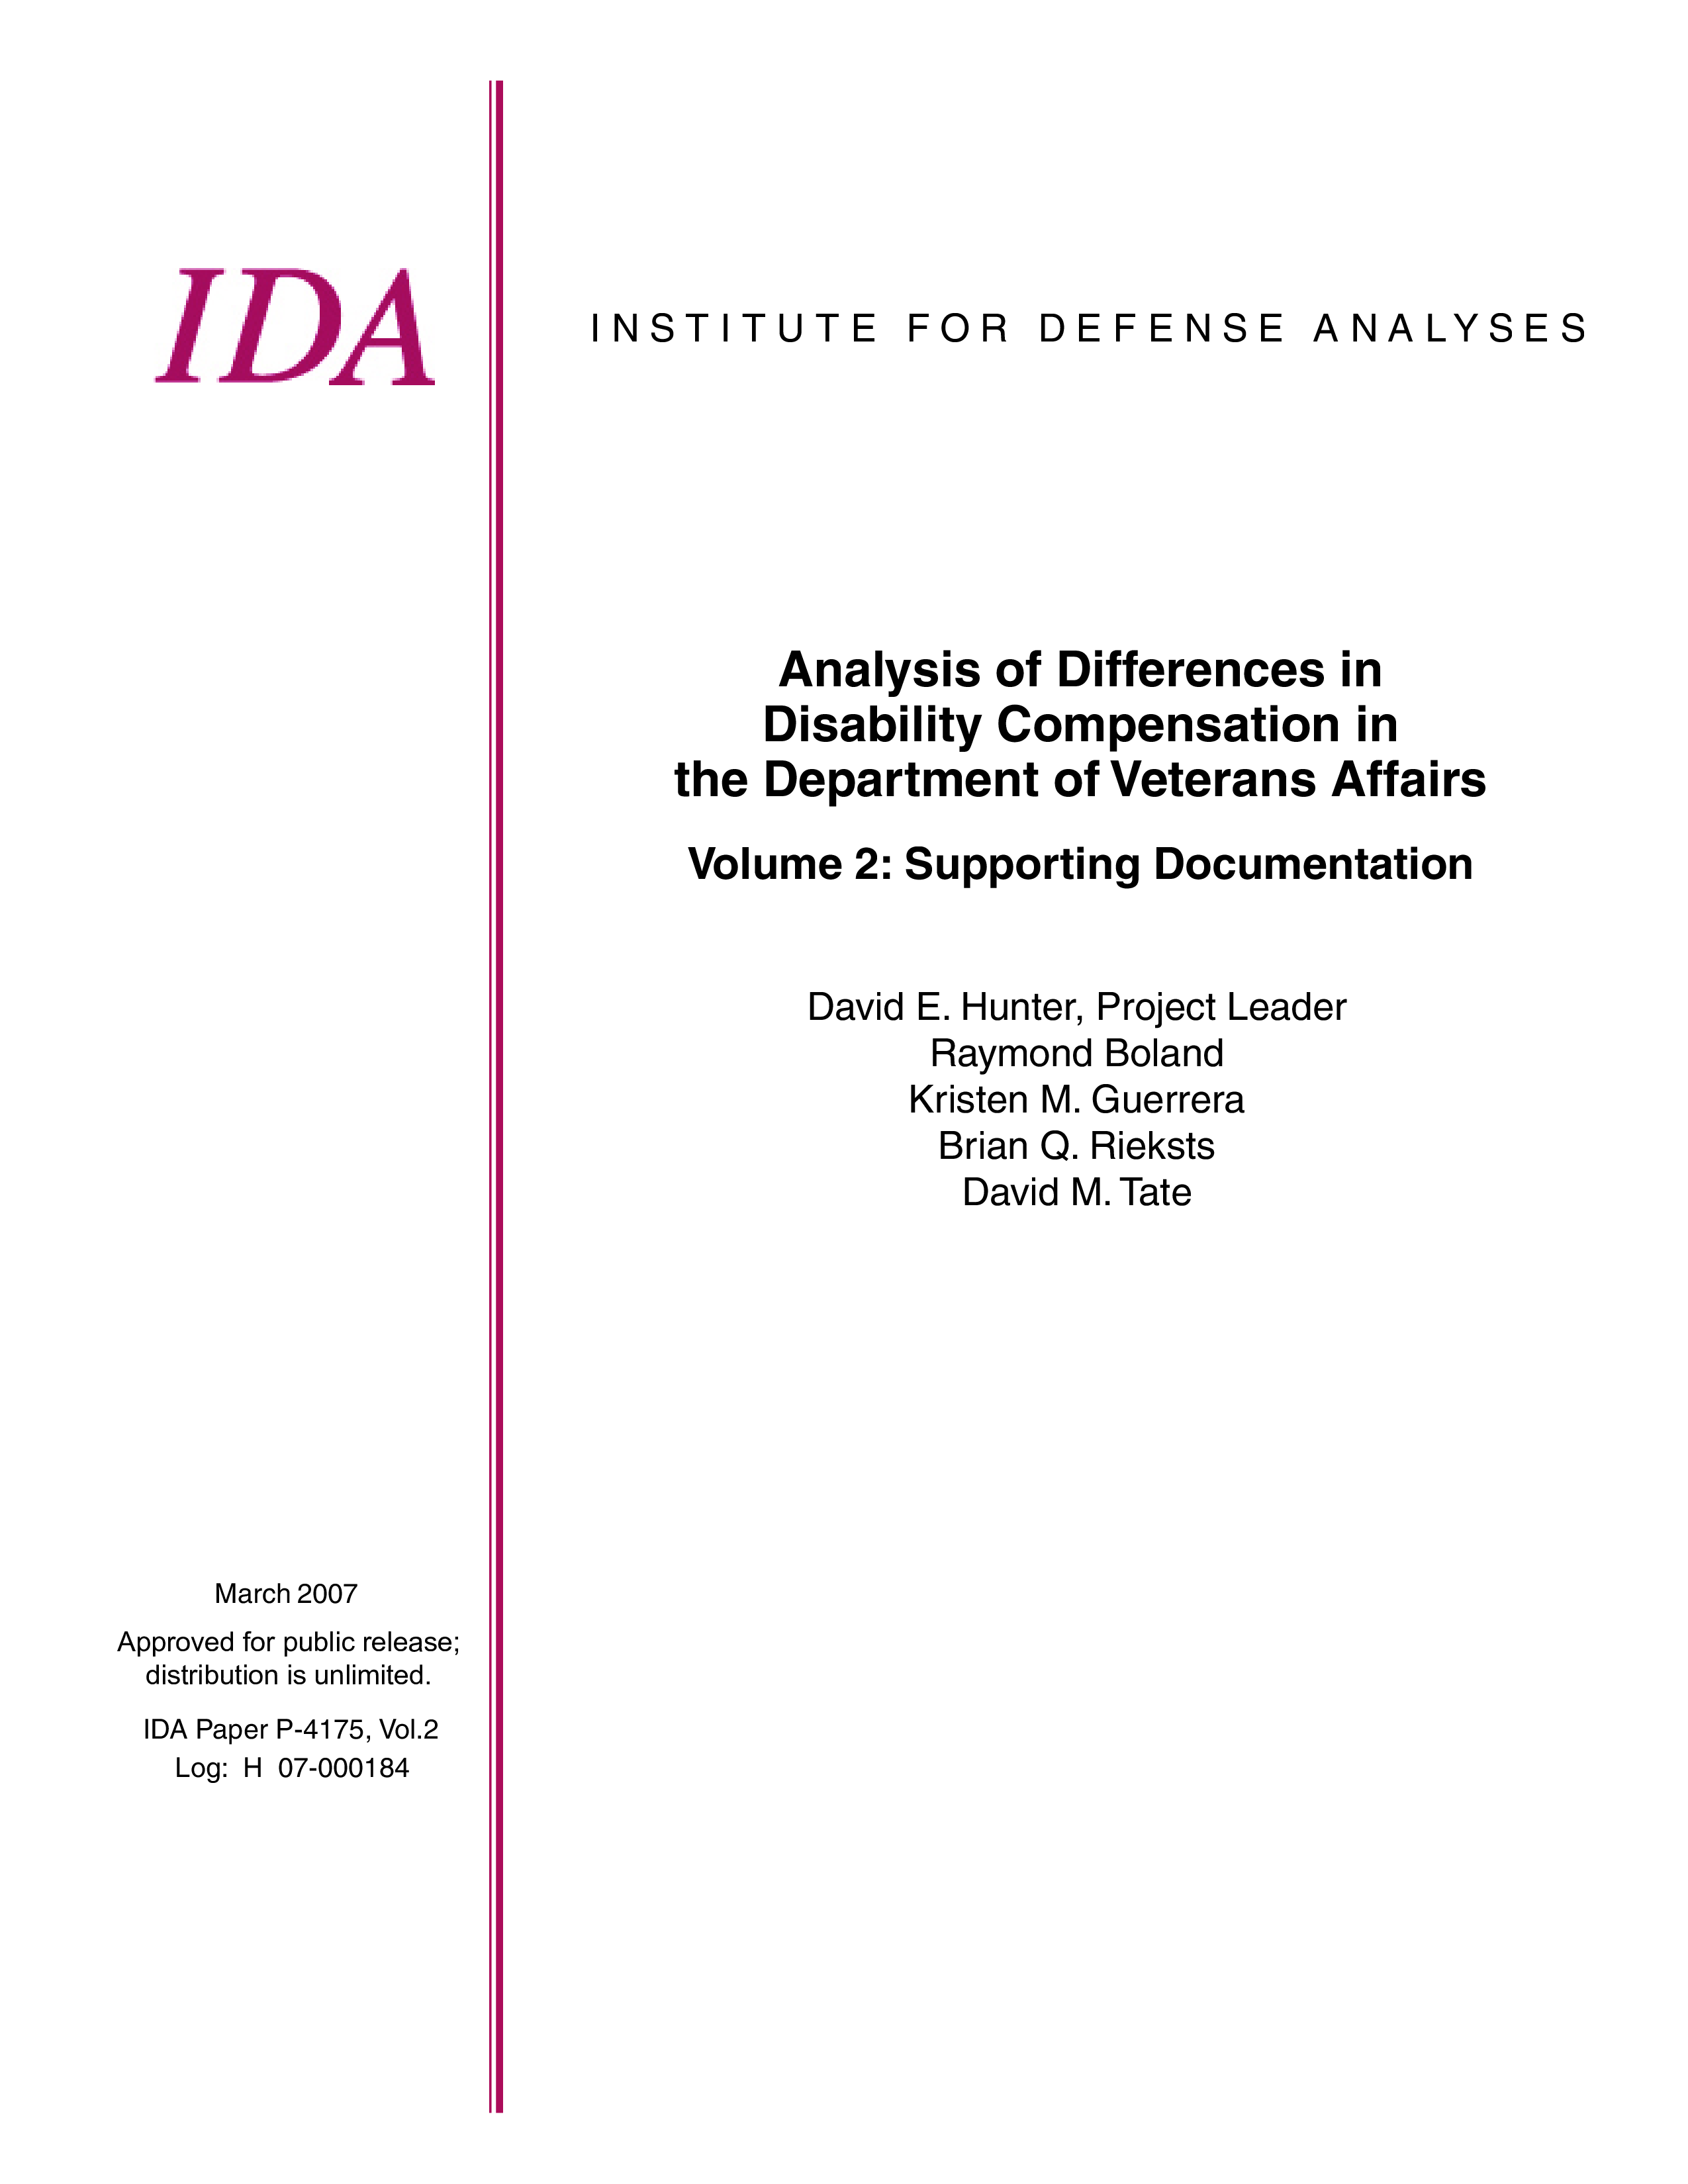 Analysis of Differences in Disability Compensation in the Department of Veterans Affairs, Volume 2: Supporting Documentation